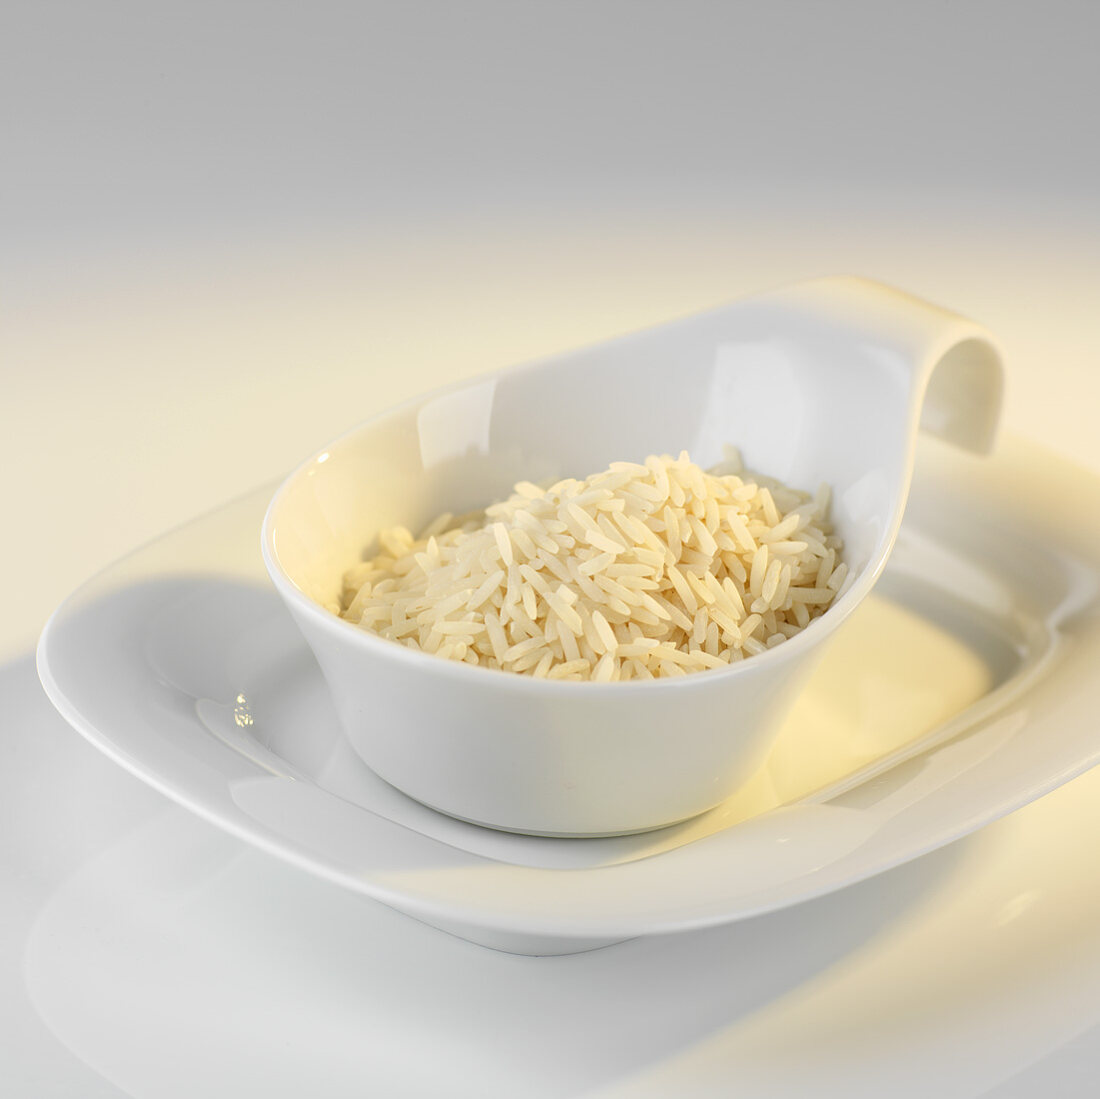 Portion of uncooked rice in a small bowl